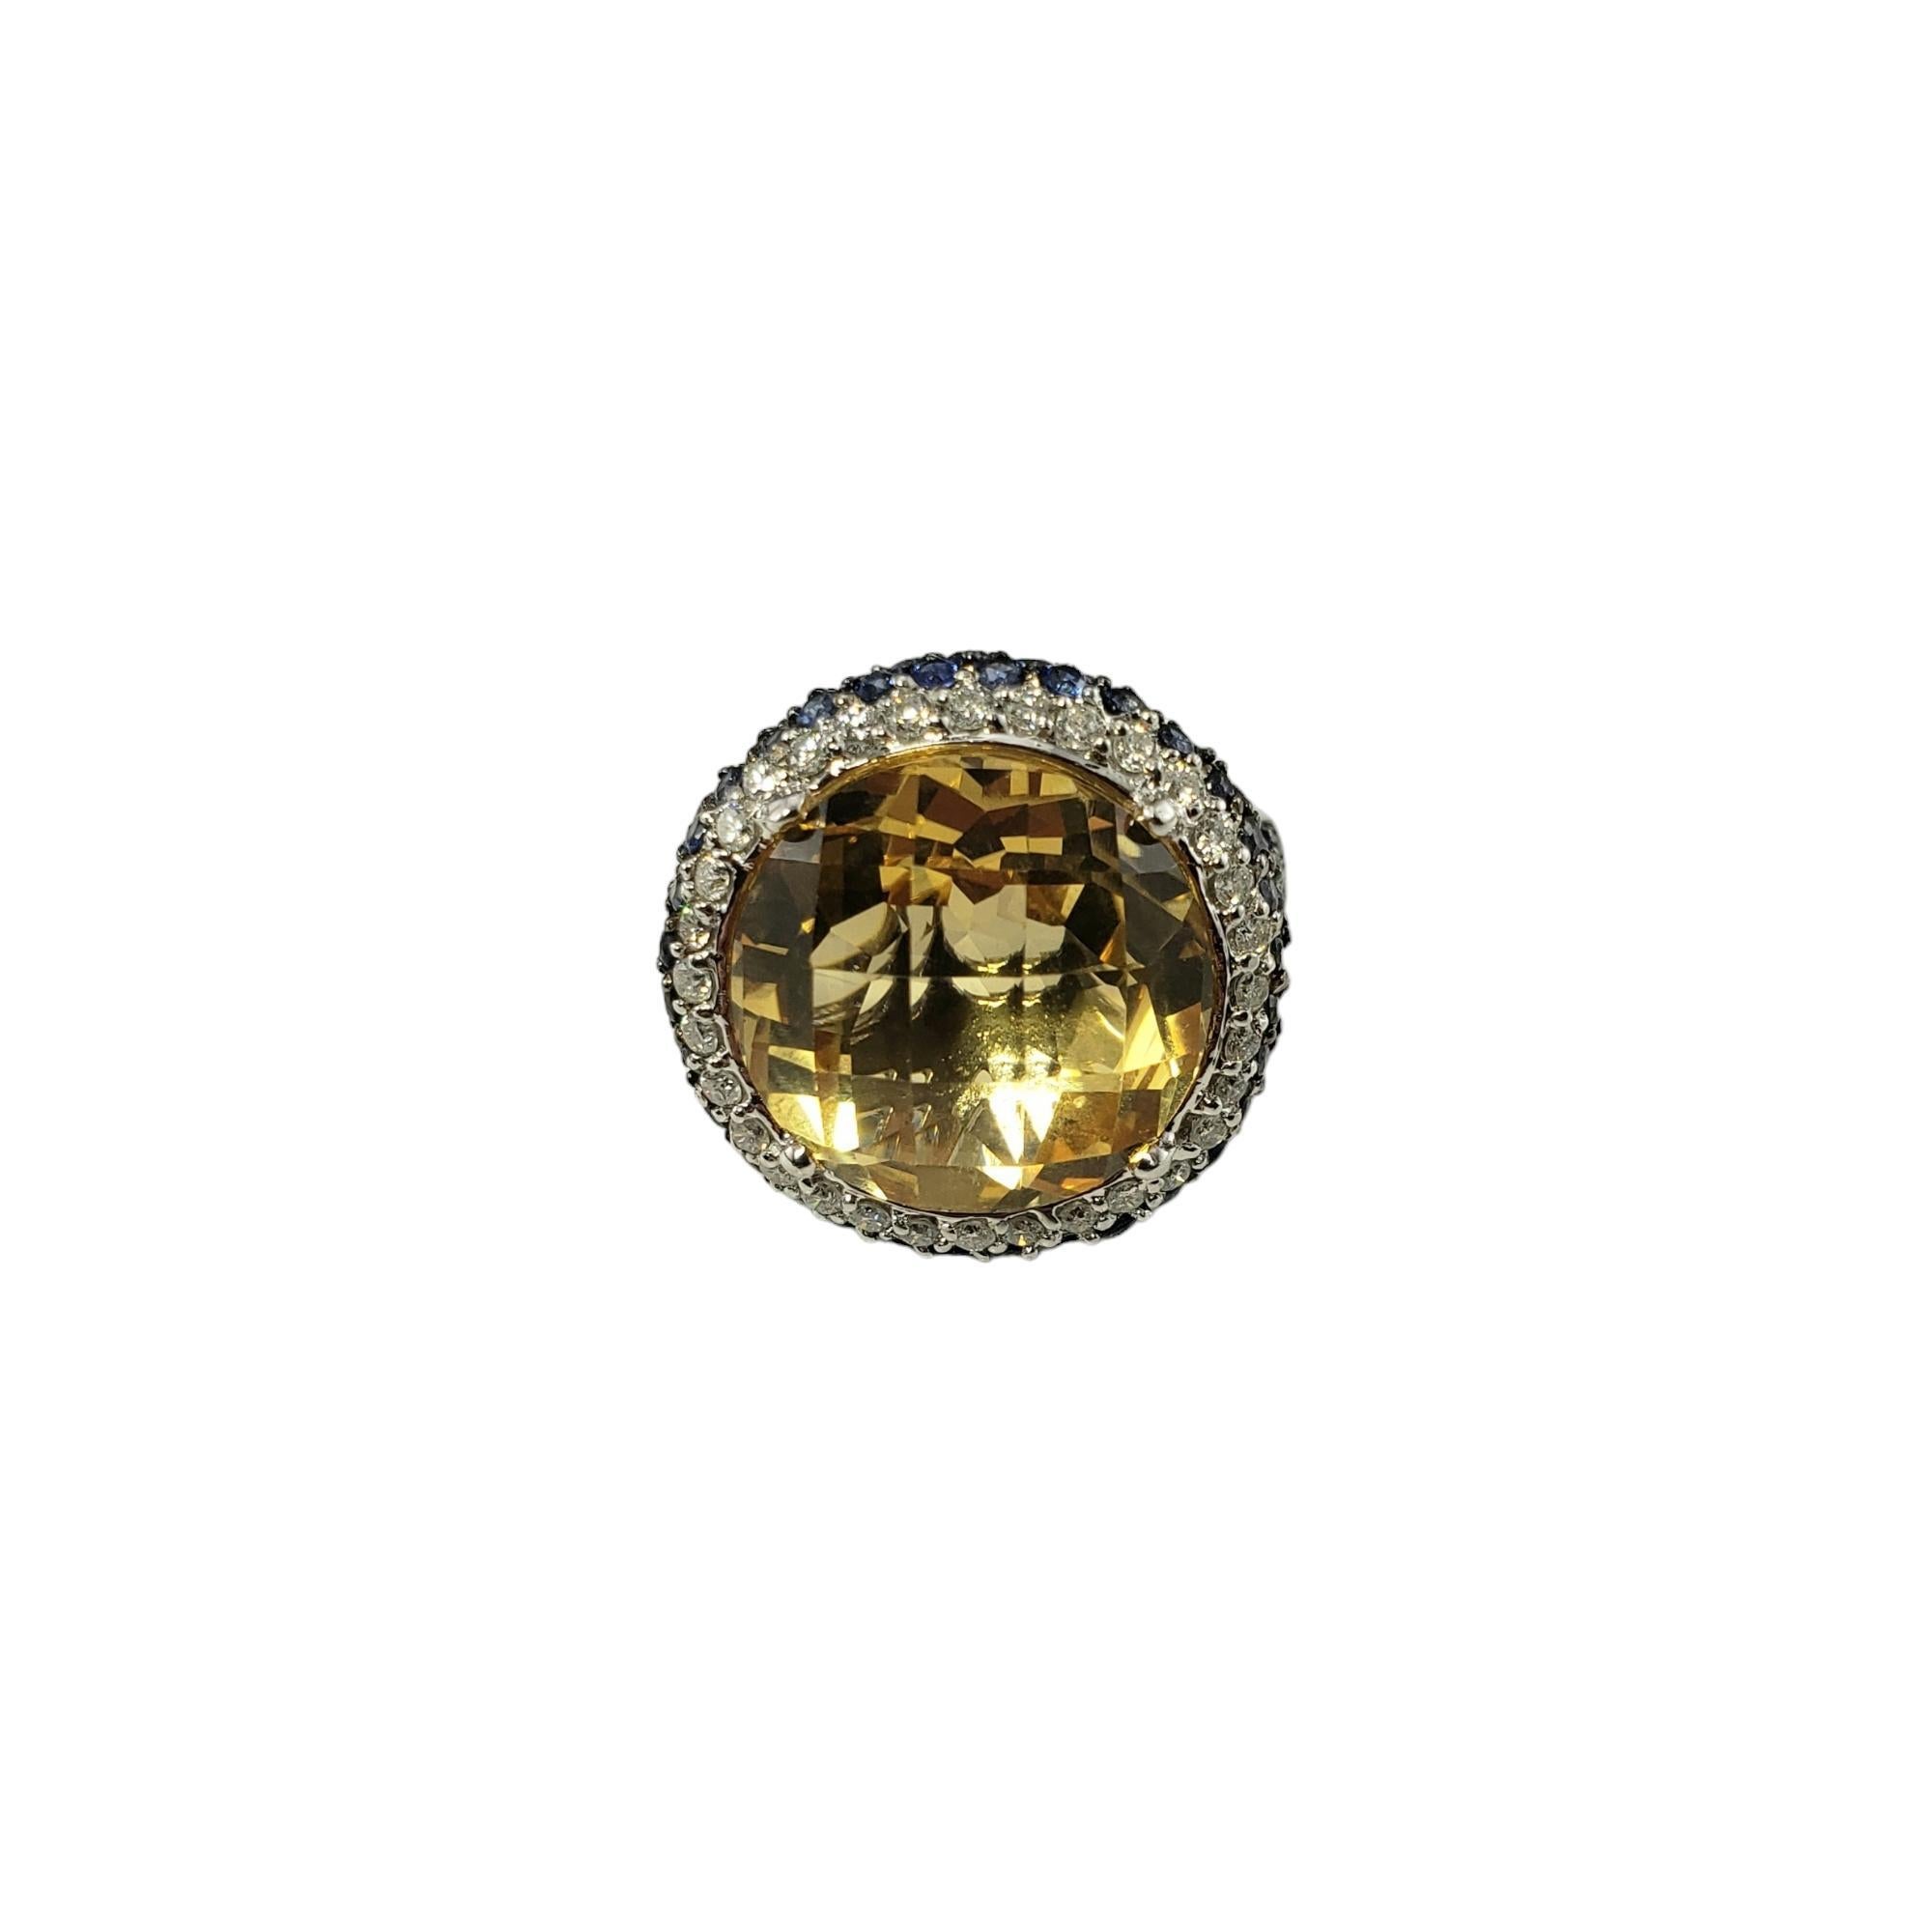 Vintage 14K White Gold Citrine, Diamond and Sapphire Ring Size 7.25 

This stunning ring features one round citrine quartz stone (14.6 mm x 14.6 mm), 142 round sapphires and 32 round brilliant cut diamonds set in beautifully detailed 14K white gold.